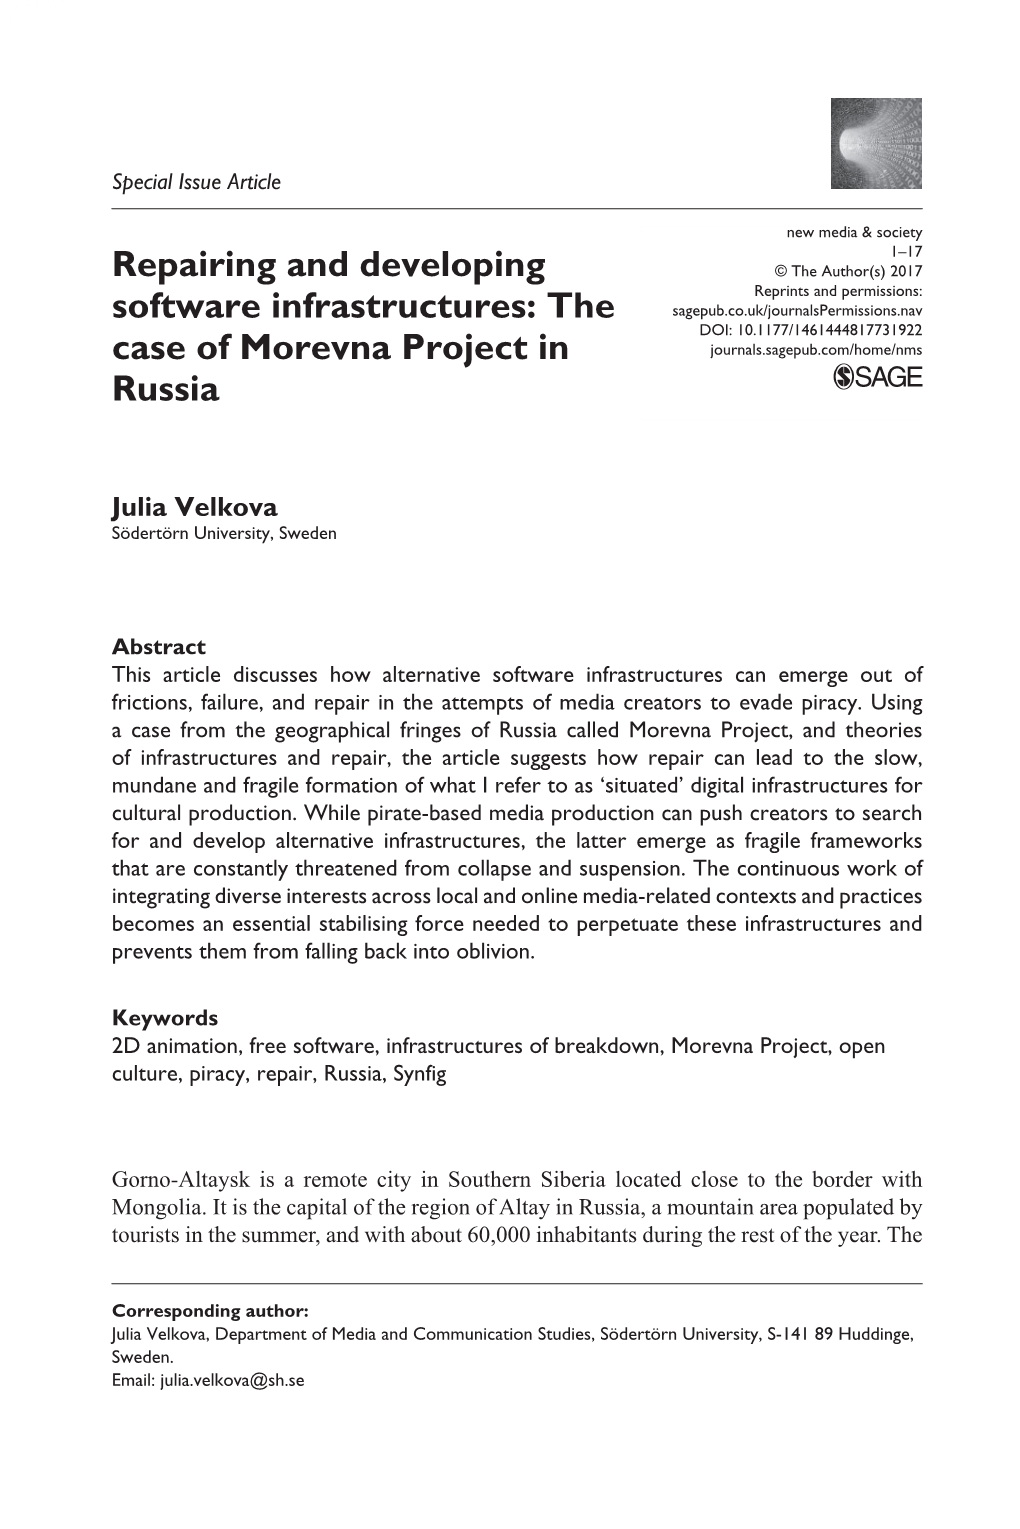 Repairing and Developing Software Infrastructures